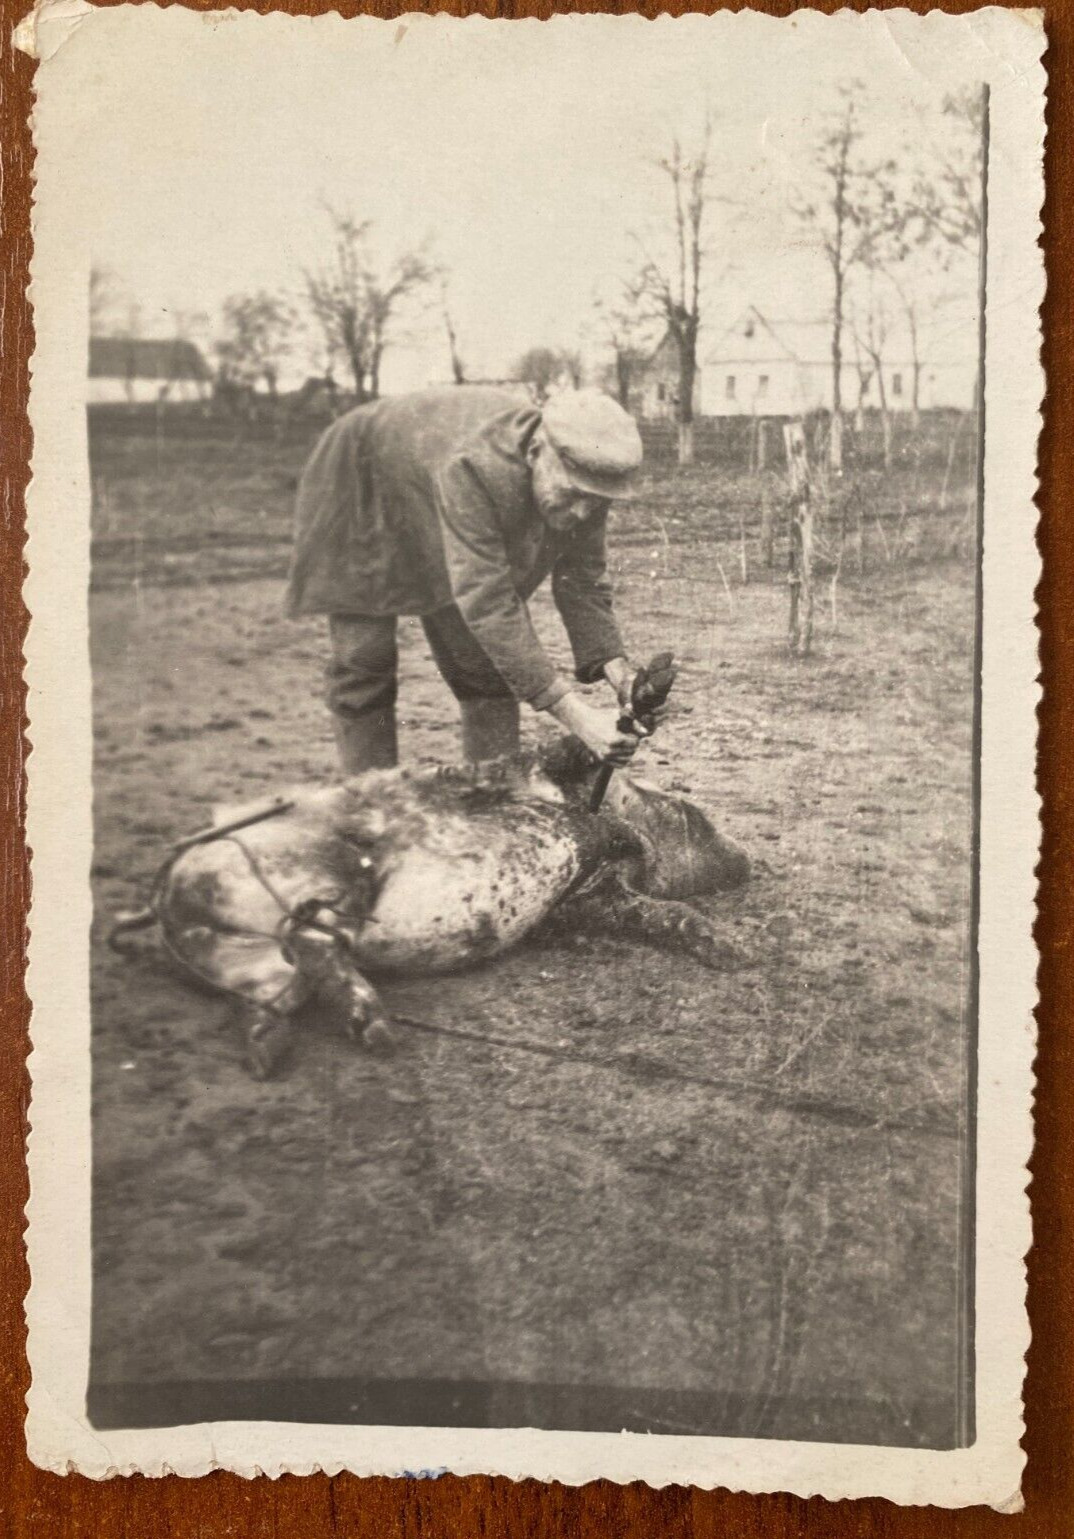 Man slaughtered a pig. Dead pig. It's a scary, strange photo. Vintage photo